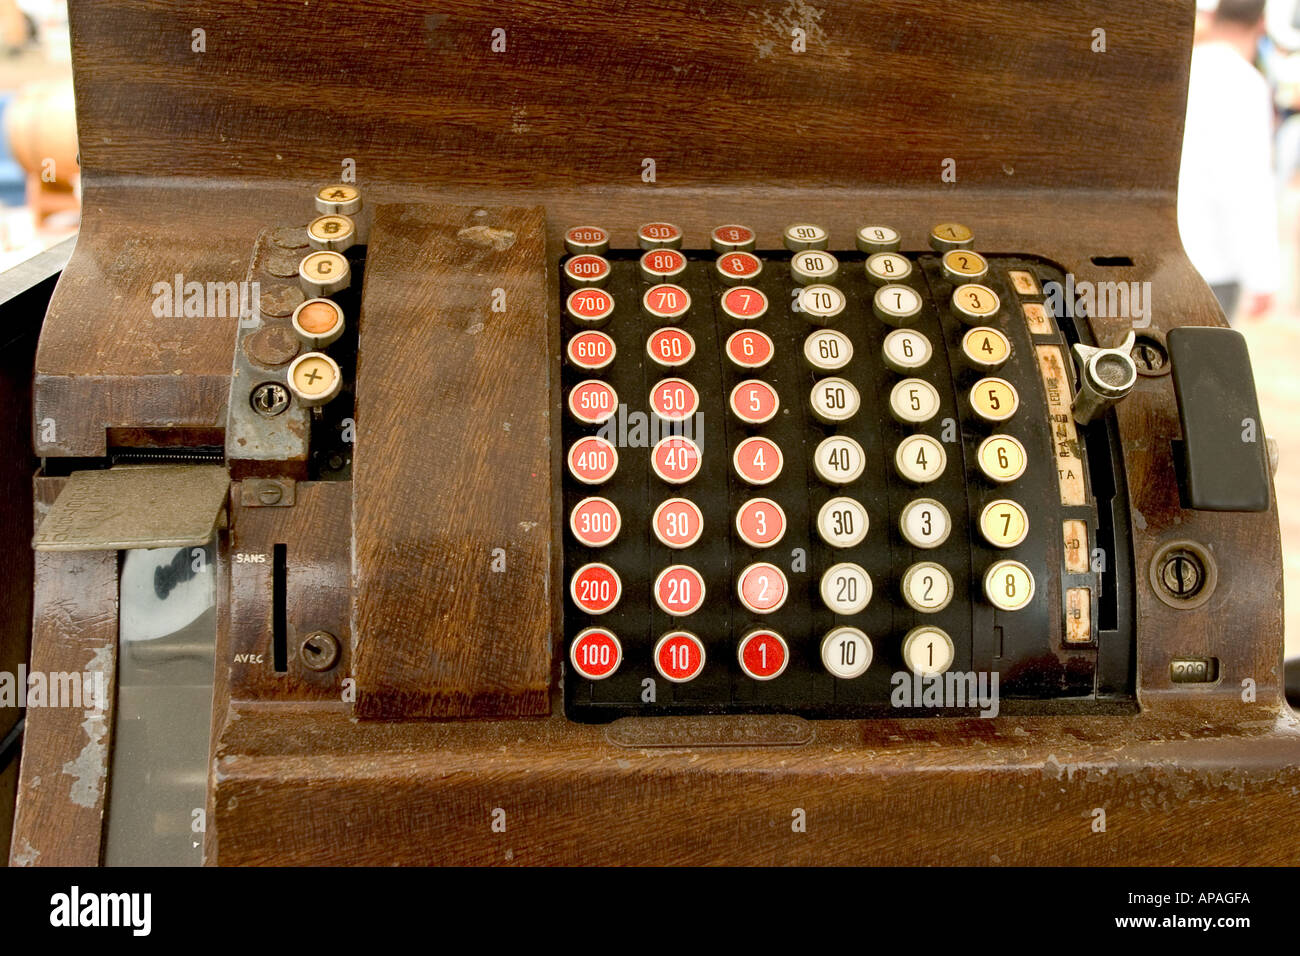 old fashioned cash register with details of keys Stock Photo